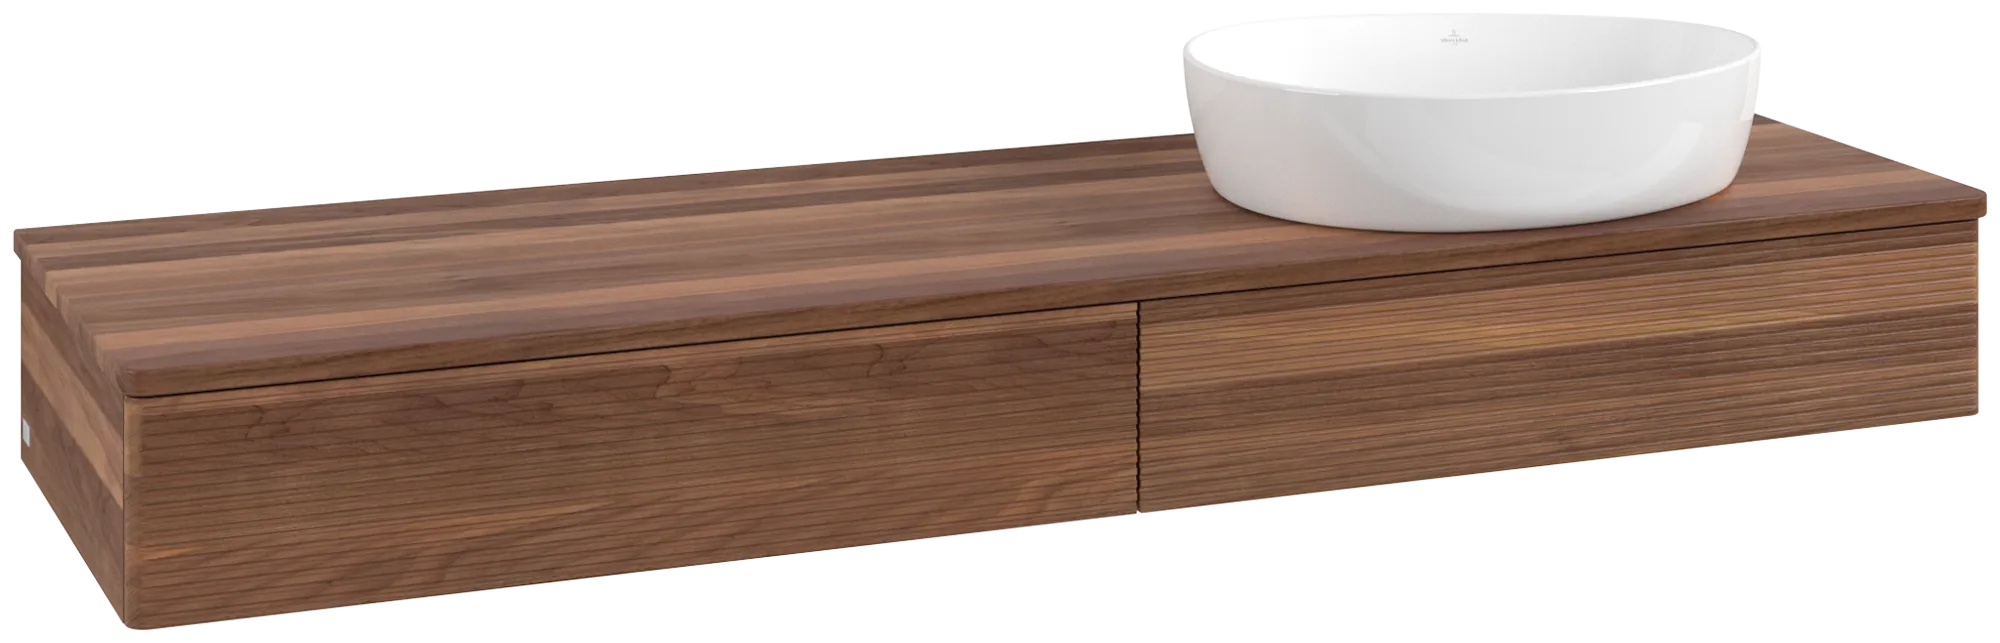 VILLEROY BOCH Antao Vanity unit, 2 pull-out compartments, 1600 x 190 x 500 mm, Front with grain texture, Warm Walnut / Warm Walnut #K16112HM resmi